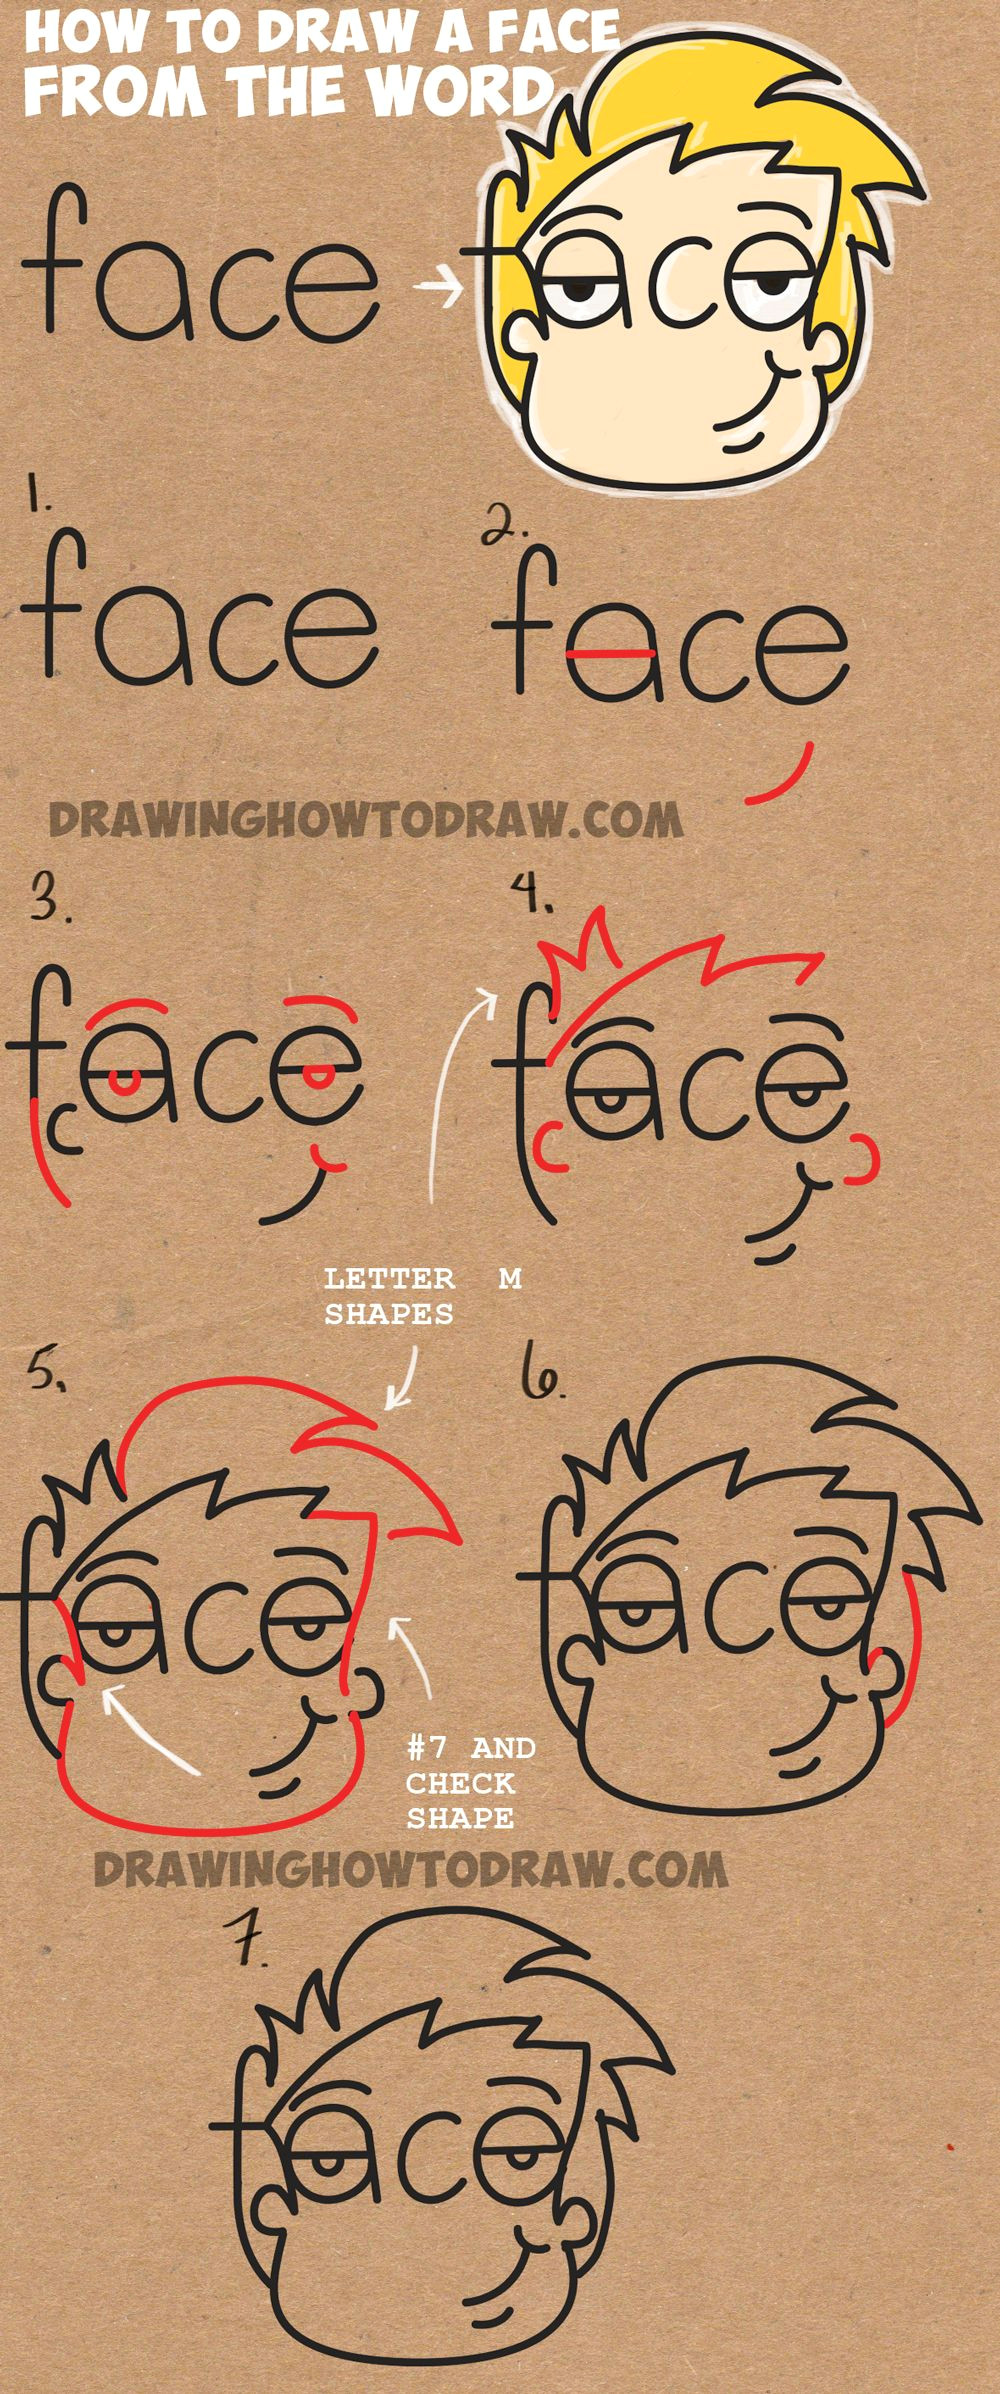 Drawing Cartoon with Shapes How to Draw Cartoon Faces From the Word Face Easy Step by Step